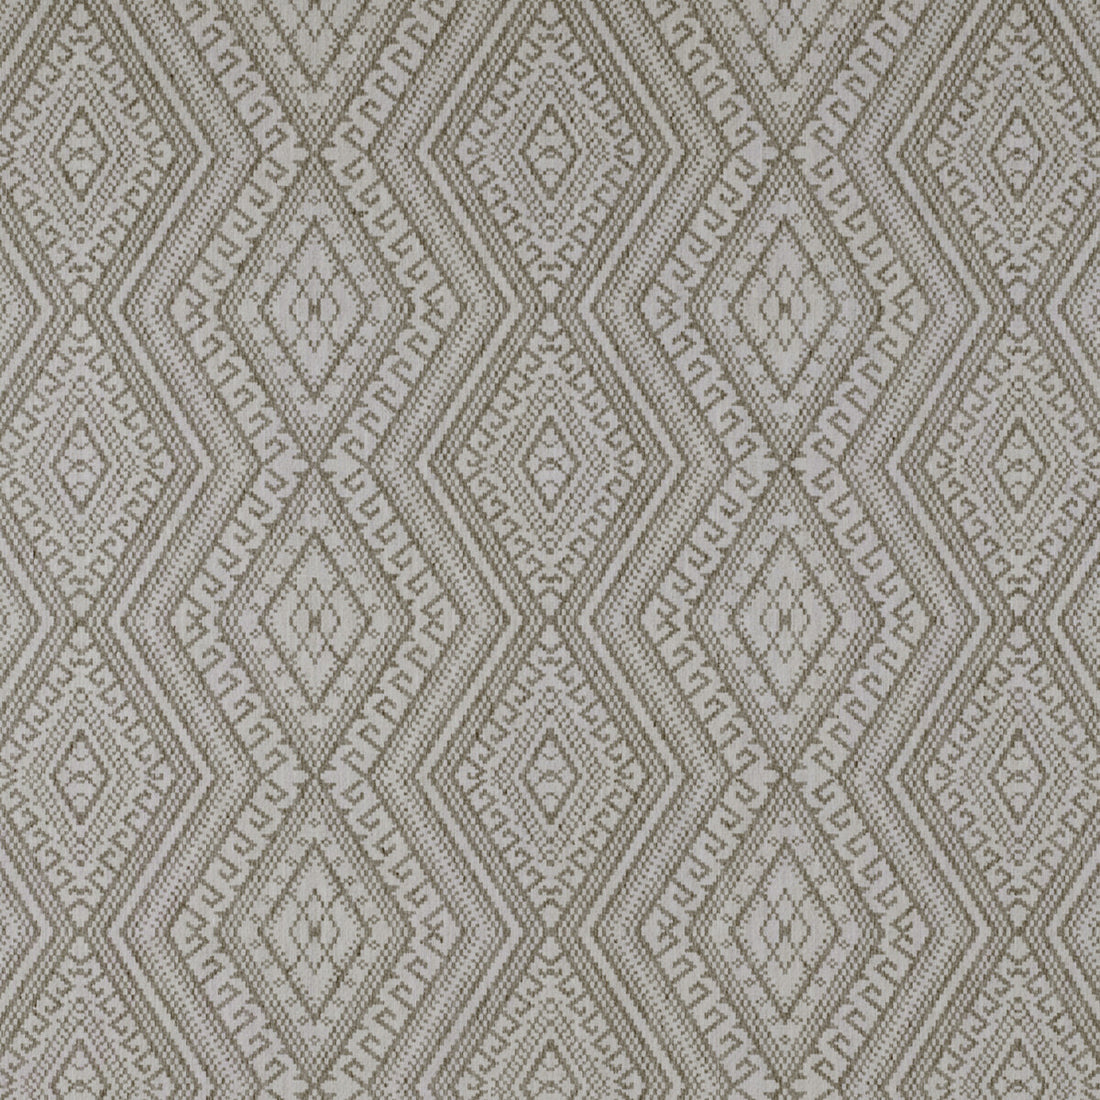 Estromboli fabric in tostado color - pattern GDT5313.003.0 - by Gaston y Daniela in the Tierras collection